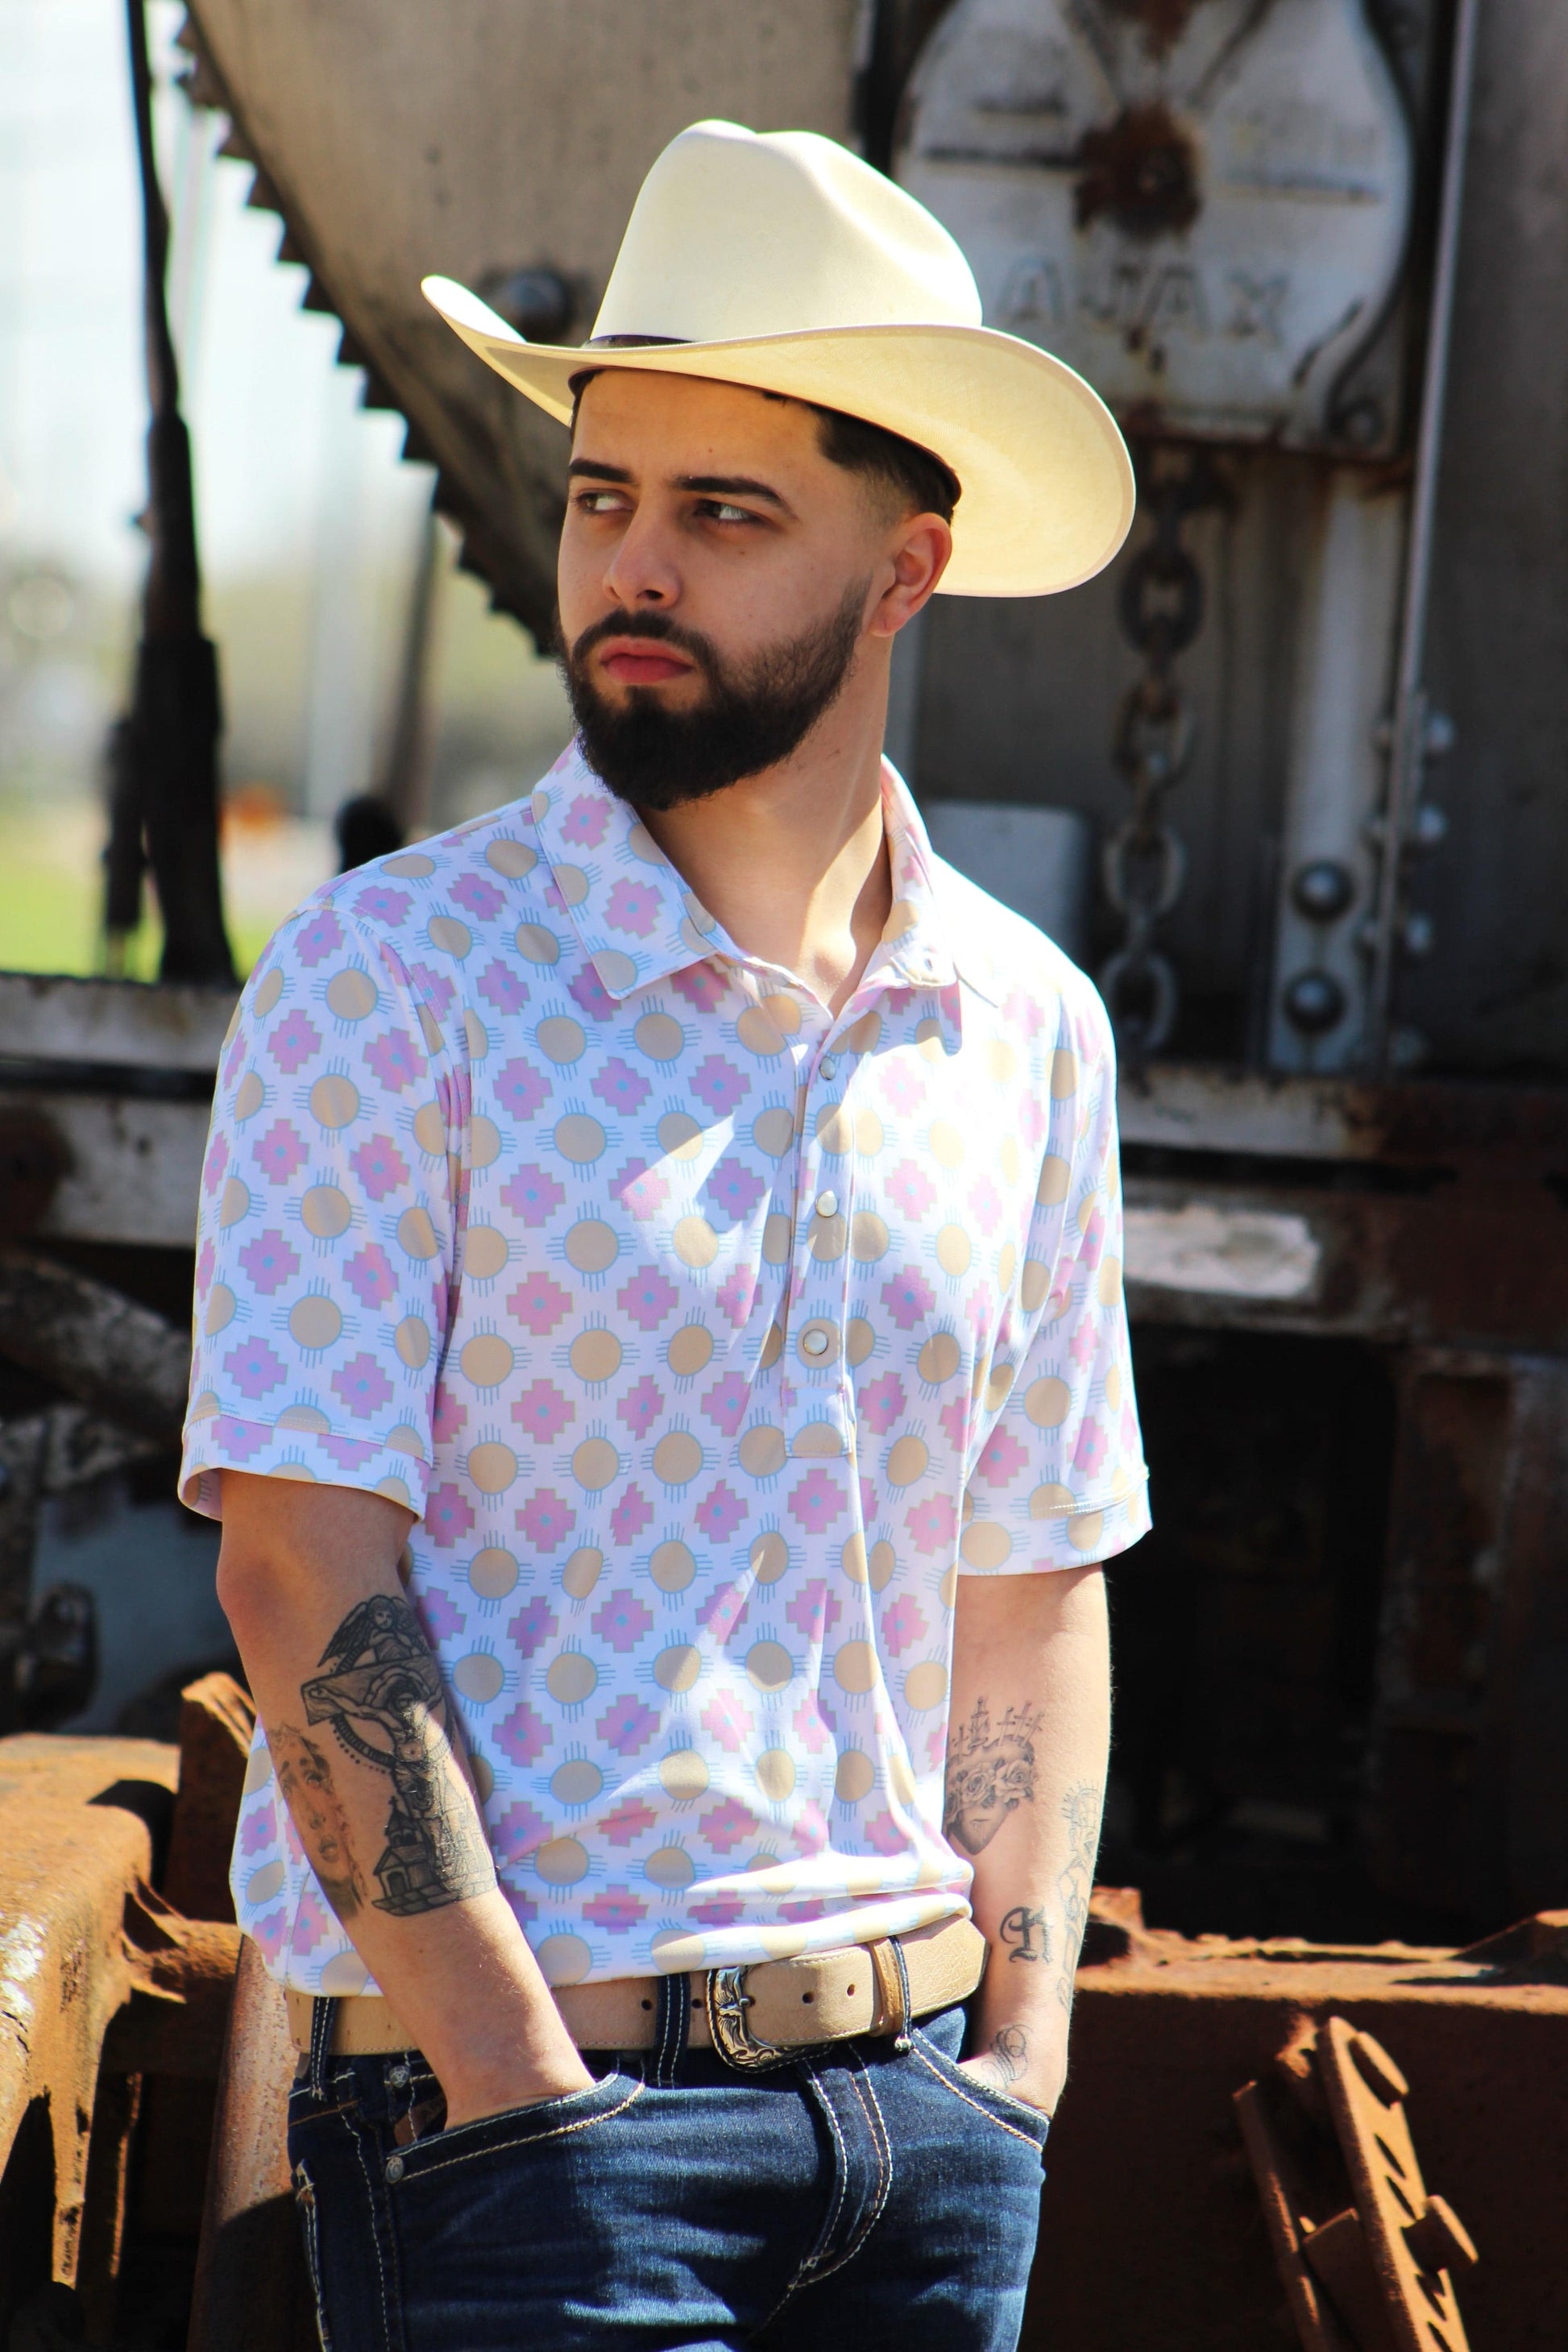 A man projects a relaxed yet confident demeanor in the Sunset Crossroads shirt by HowdyHo, featuring a playful pattern of pink and yellow suns on a light background. His classic cowboy hat and a well-fitted pair of jeans complete the ensemble, offering a modern twist on traditional Western style. The industrial backdrop adds an edgy contrast to the shirt's soft design.